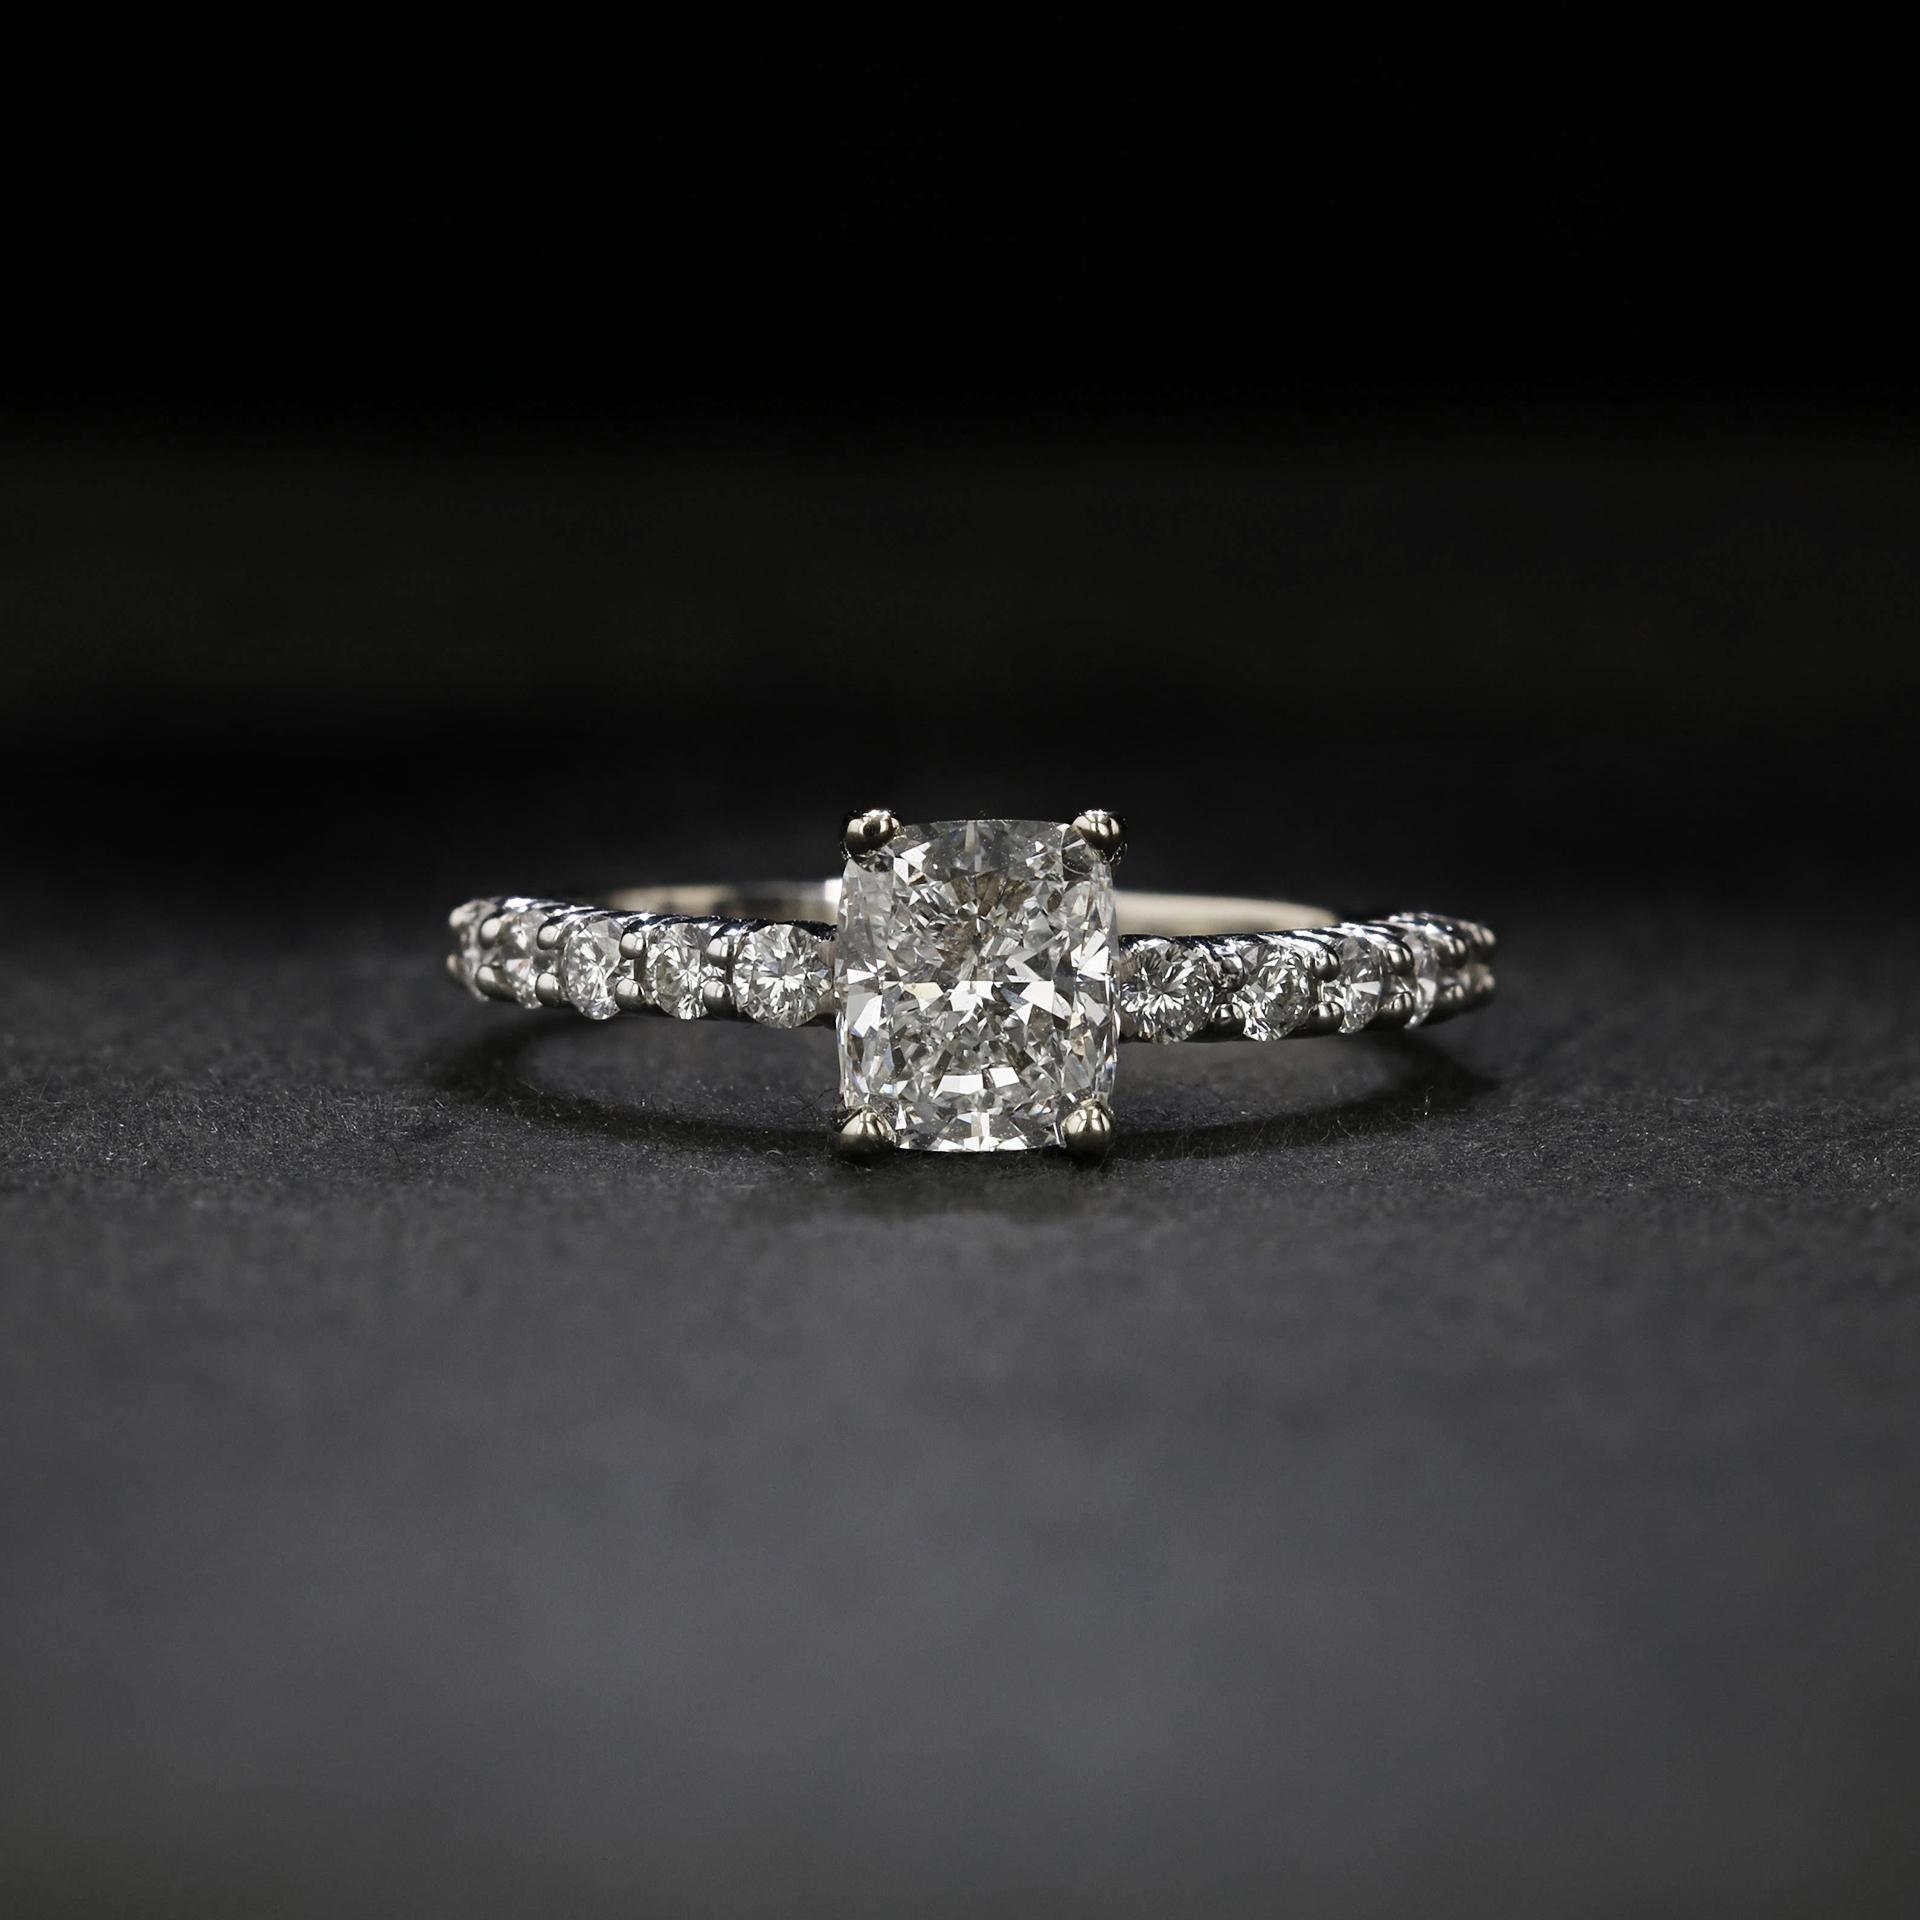 A GIA certified cushion-cut diamond of 1.22 carats, G color, and VS1 clarity is accentuated by a sparkling diamond shank. The diamonds adorning the shank are round and of matching color and clarity to the center stone. Fashioned in platinum.